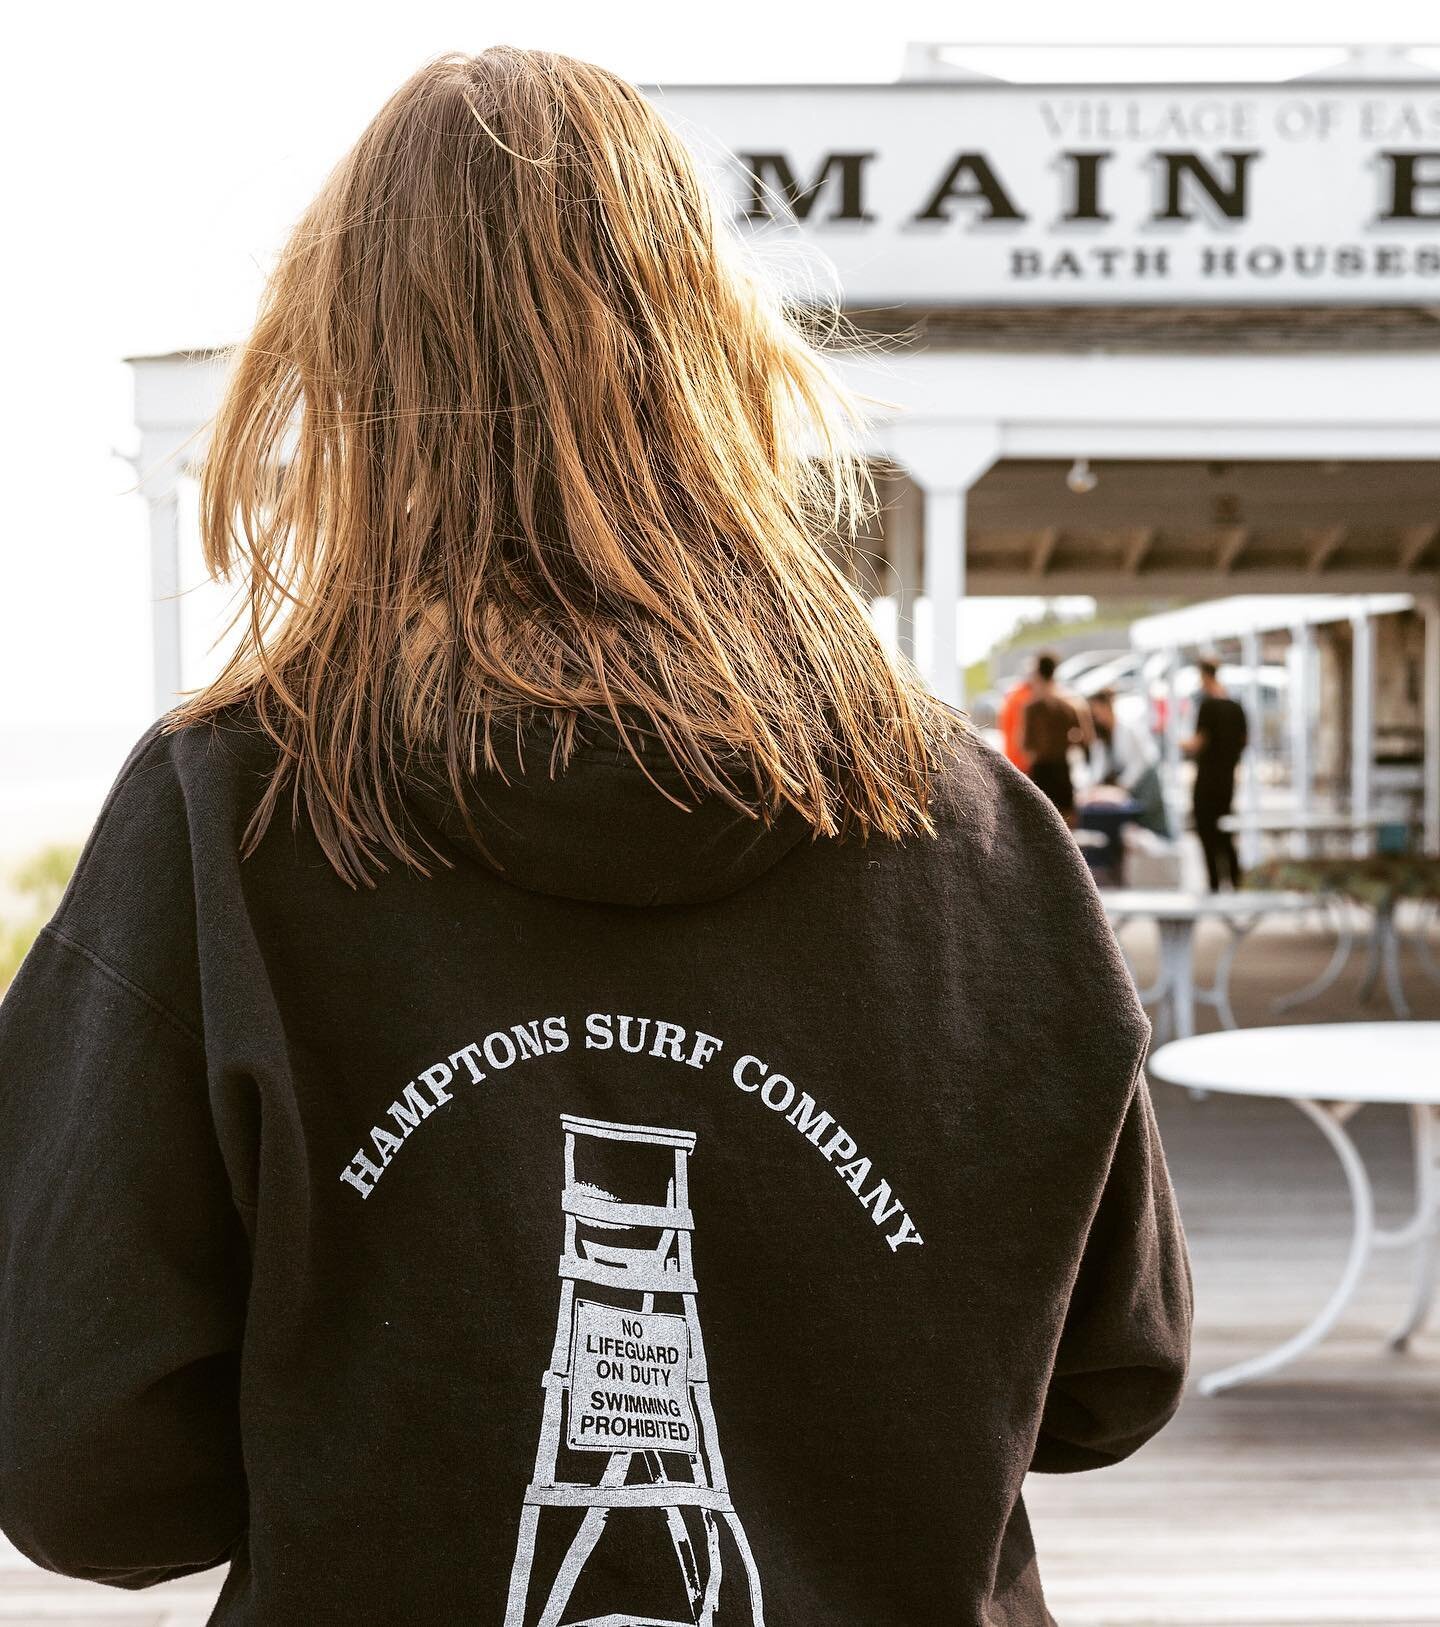 A heat wave is a perfect time to get more @thebeachhutonmain hoodies back in stock! Tap to shop now or head over to Main Beach to pick one up. More to come - stay tuned 👀☀️ 

#hamptons #surf #easthampton #montauk #mainbeach #hoodies #hamptonssummer